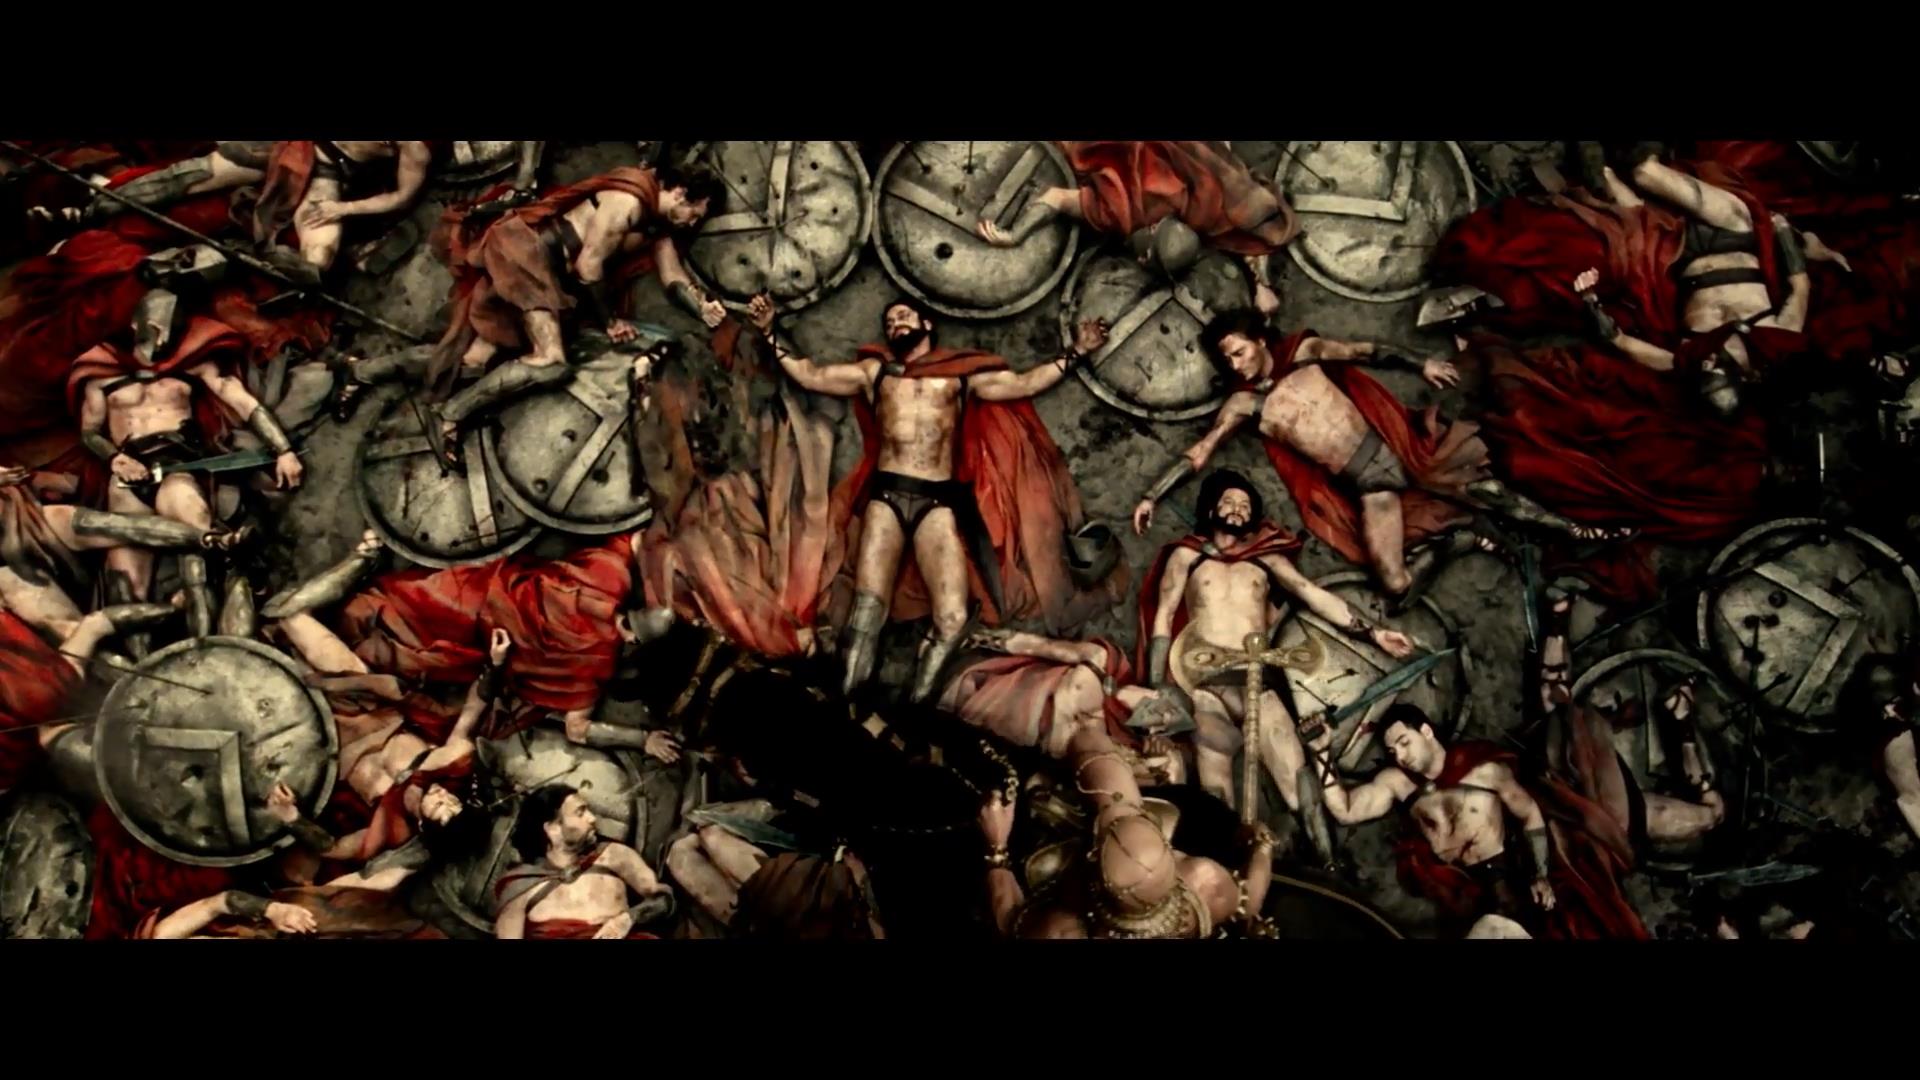 heDD magazine [VIDEO] 300: Rise Of An Empire - EPIC New Trailer ...